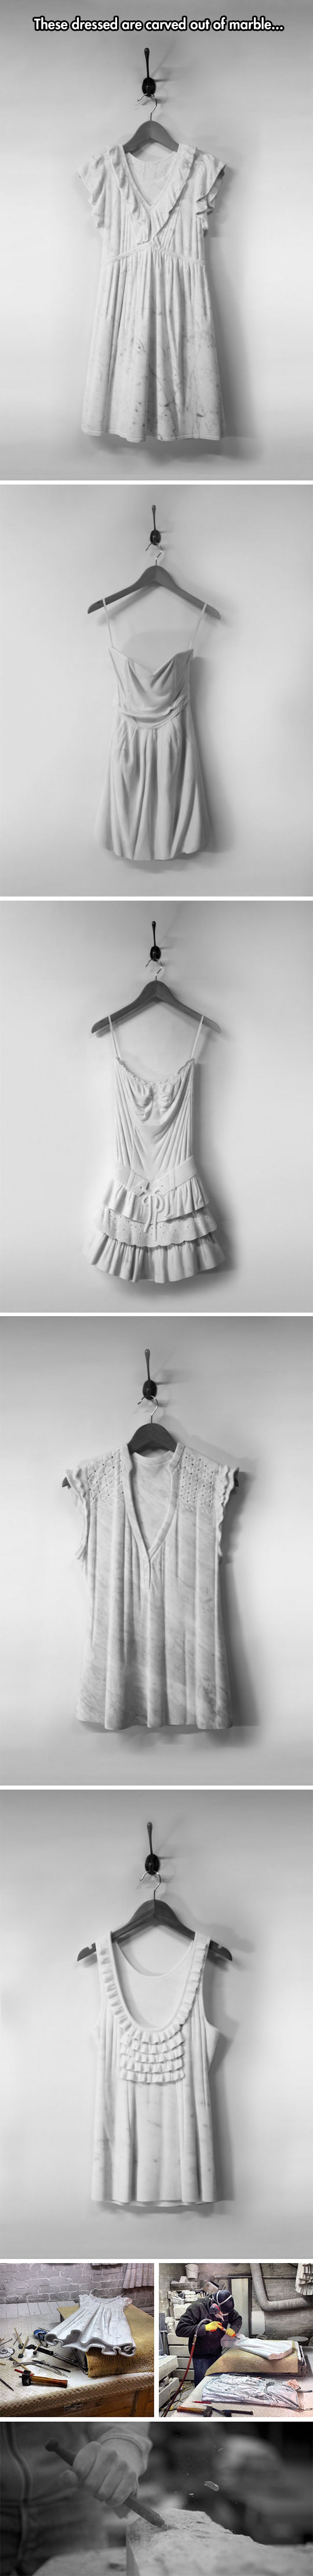 Airy Dresses Carved From Marble